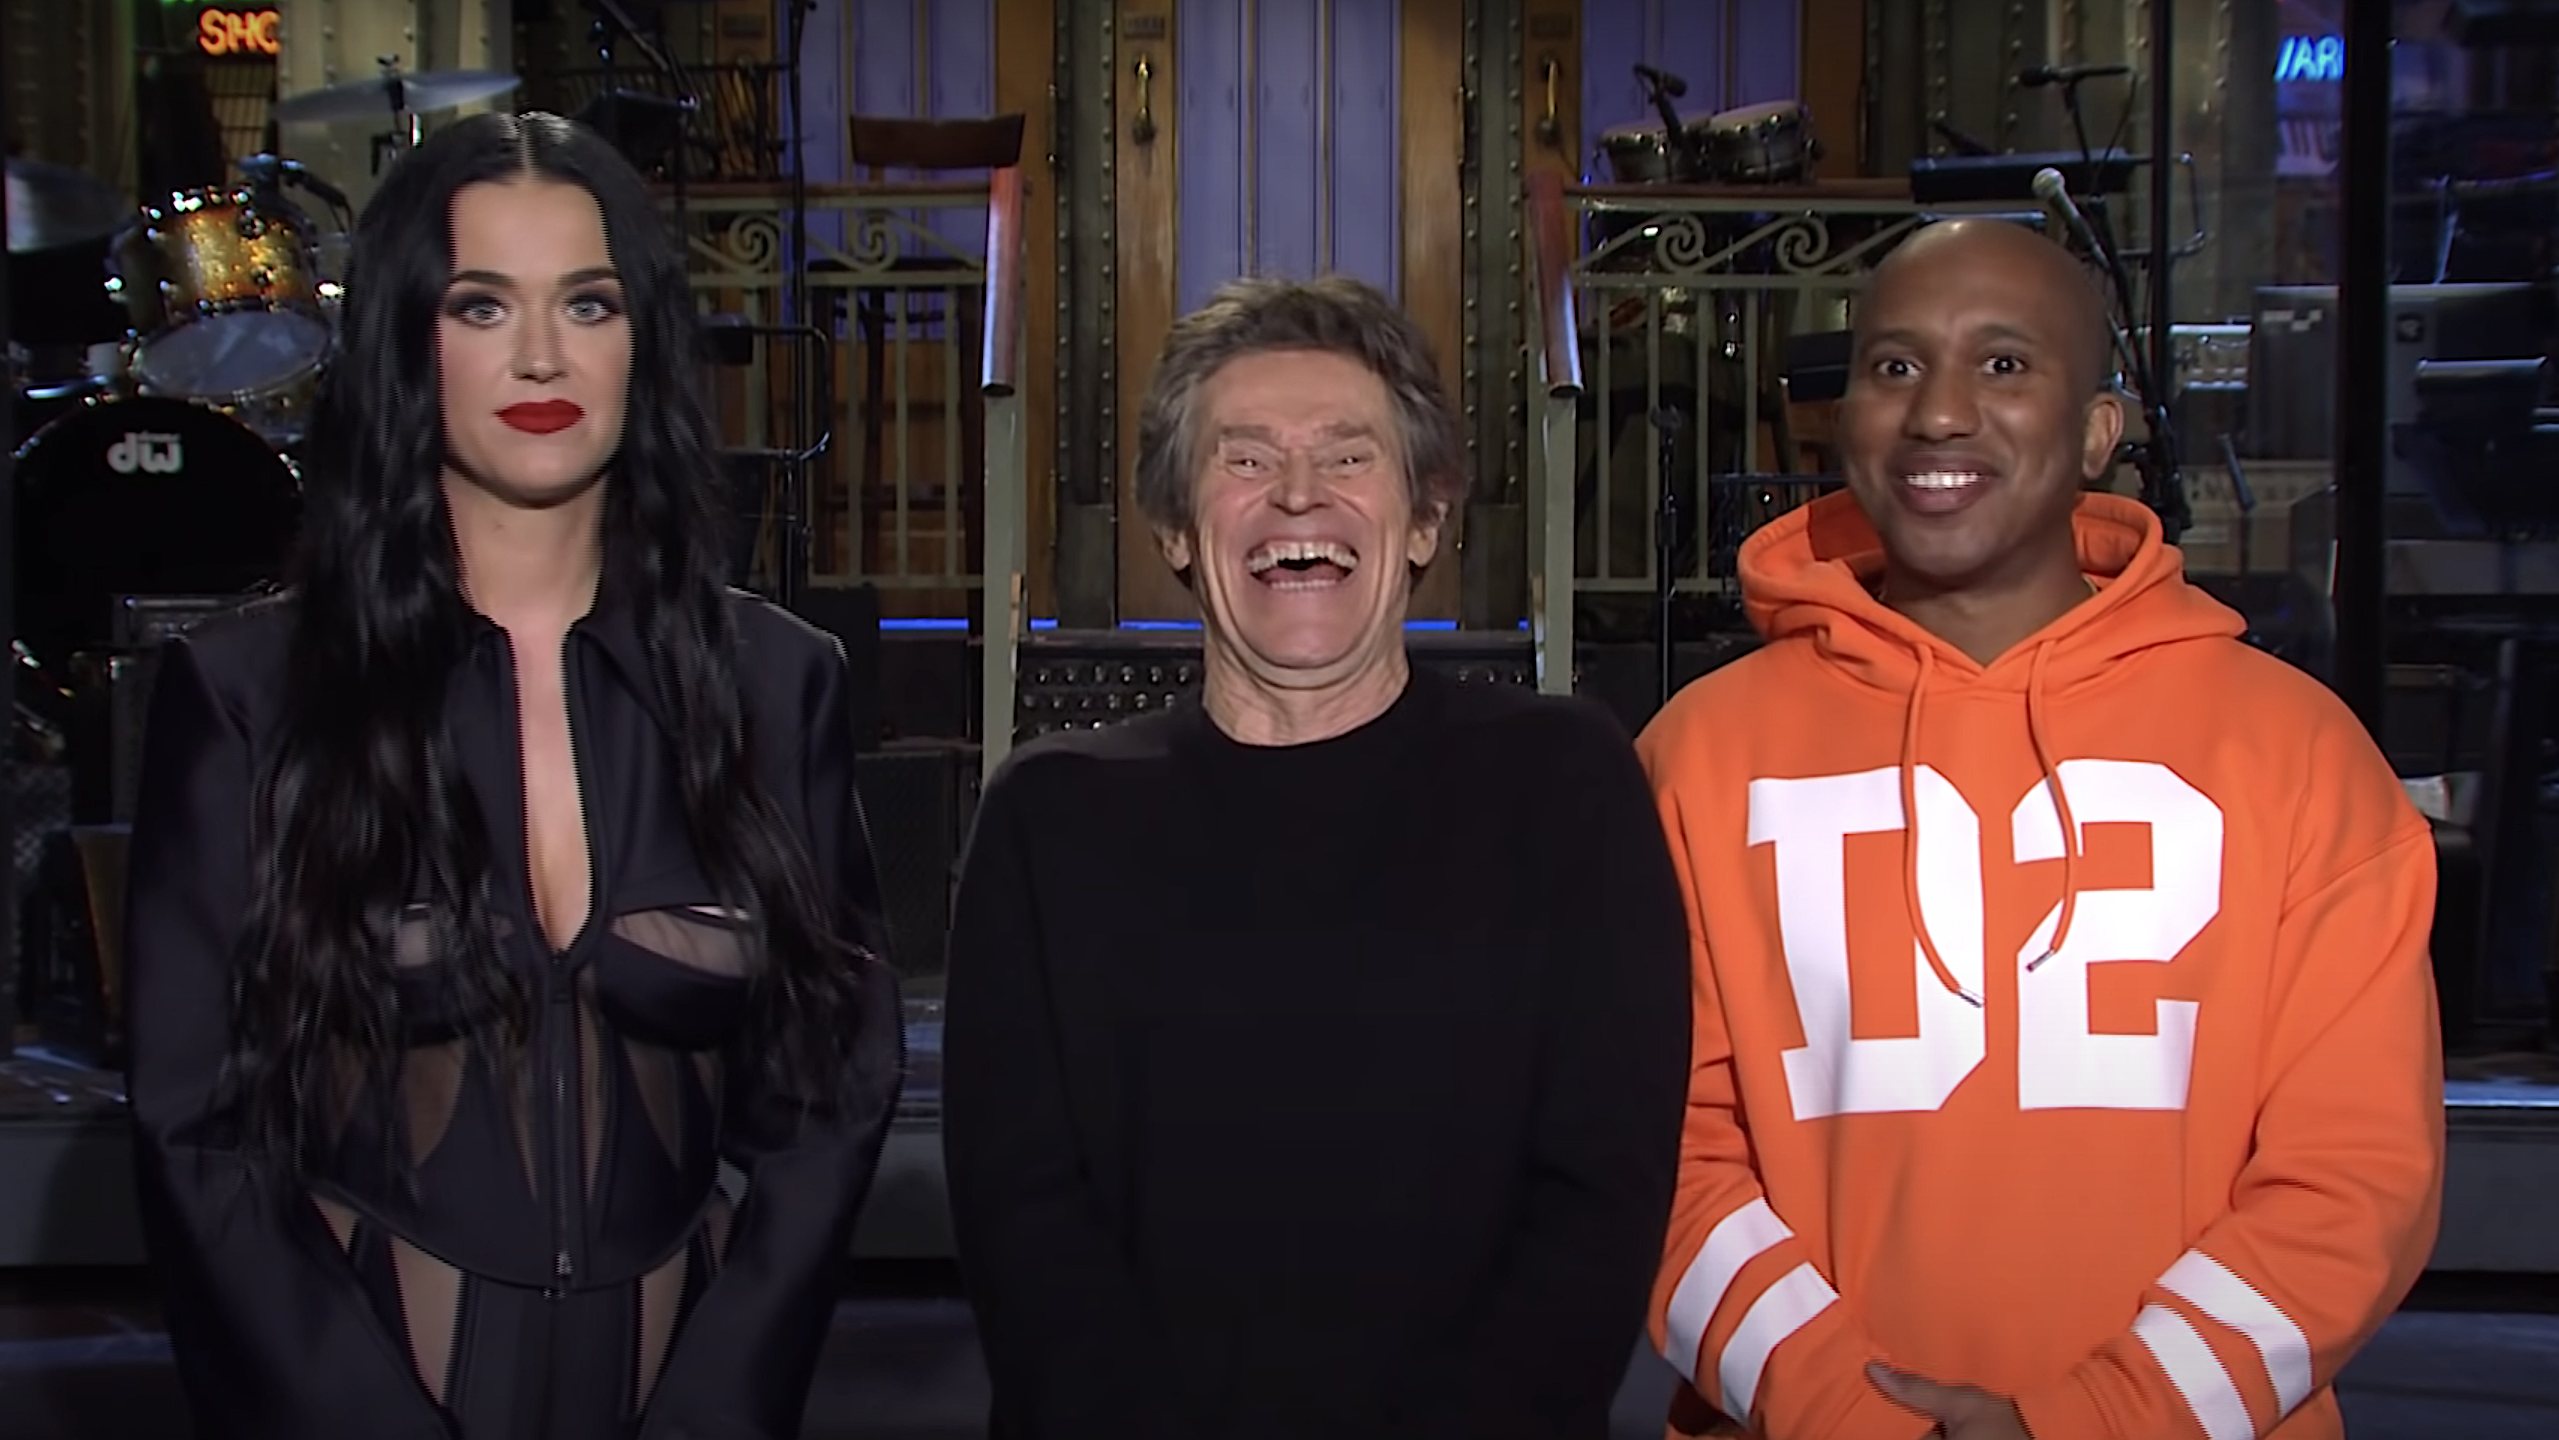 Willem Dafoe gets intense as he predicts hosting SNL will be the best night of his life